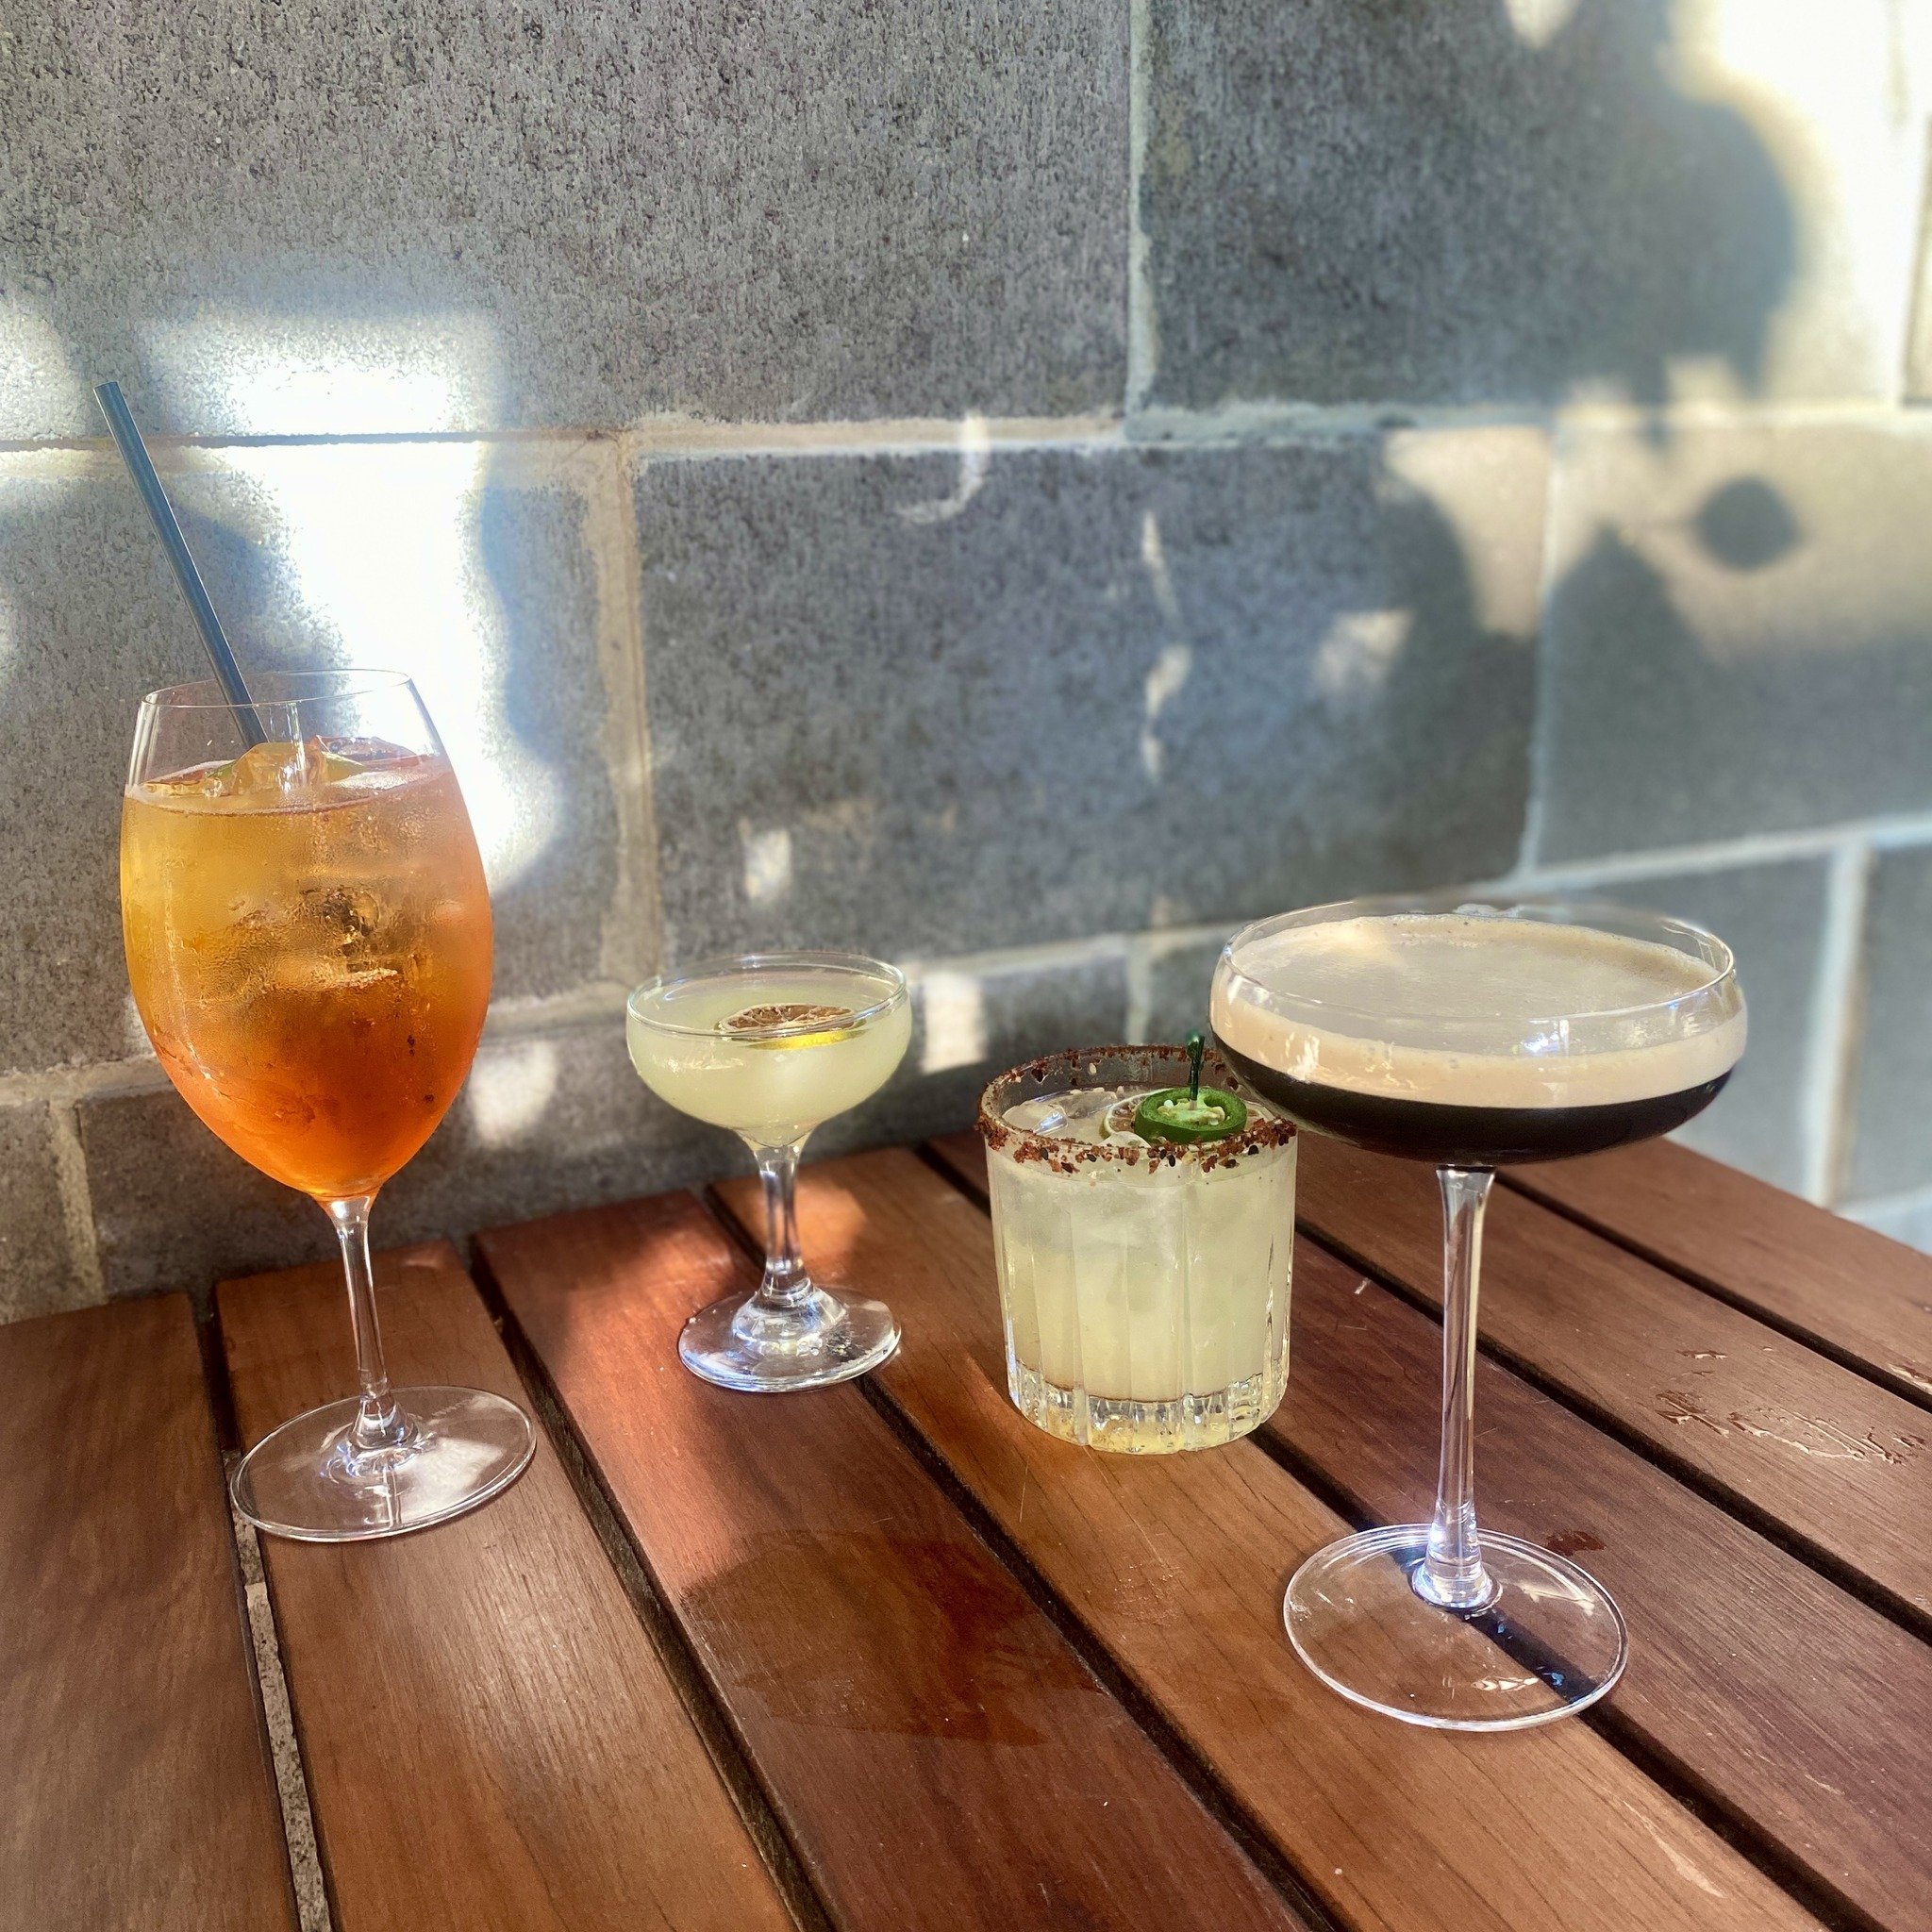 We're counting down to Happy Hour! From 3-6pm daily (yes, even on weekends), join us for schooners from $6, $7 wines, sparkling and spirits and $14 cocktails! 

See you soon, then?!
.
.
.
.
.
#royalsaxon #melbournepub #melbournepubs #melbourne #richm